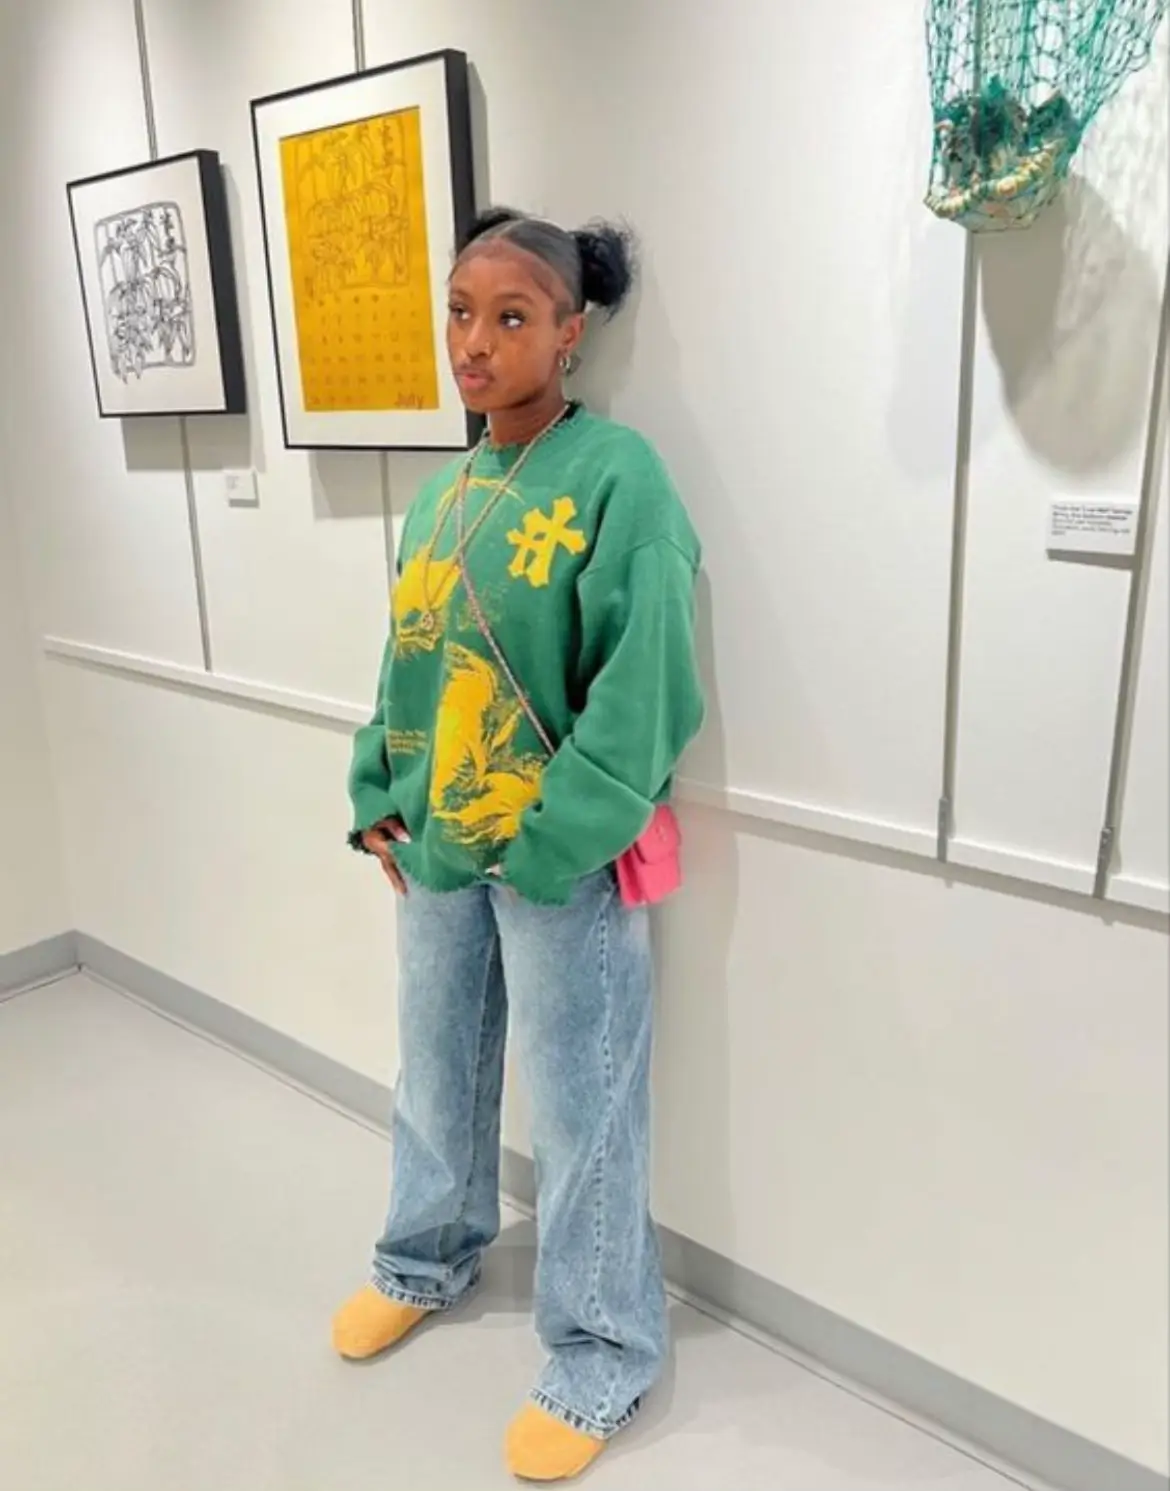  A woman wearing a green sweatshirt and blue jeans stands in a room.